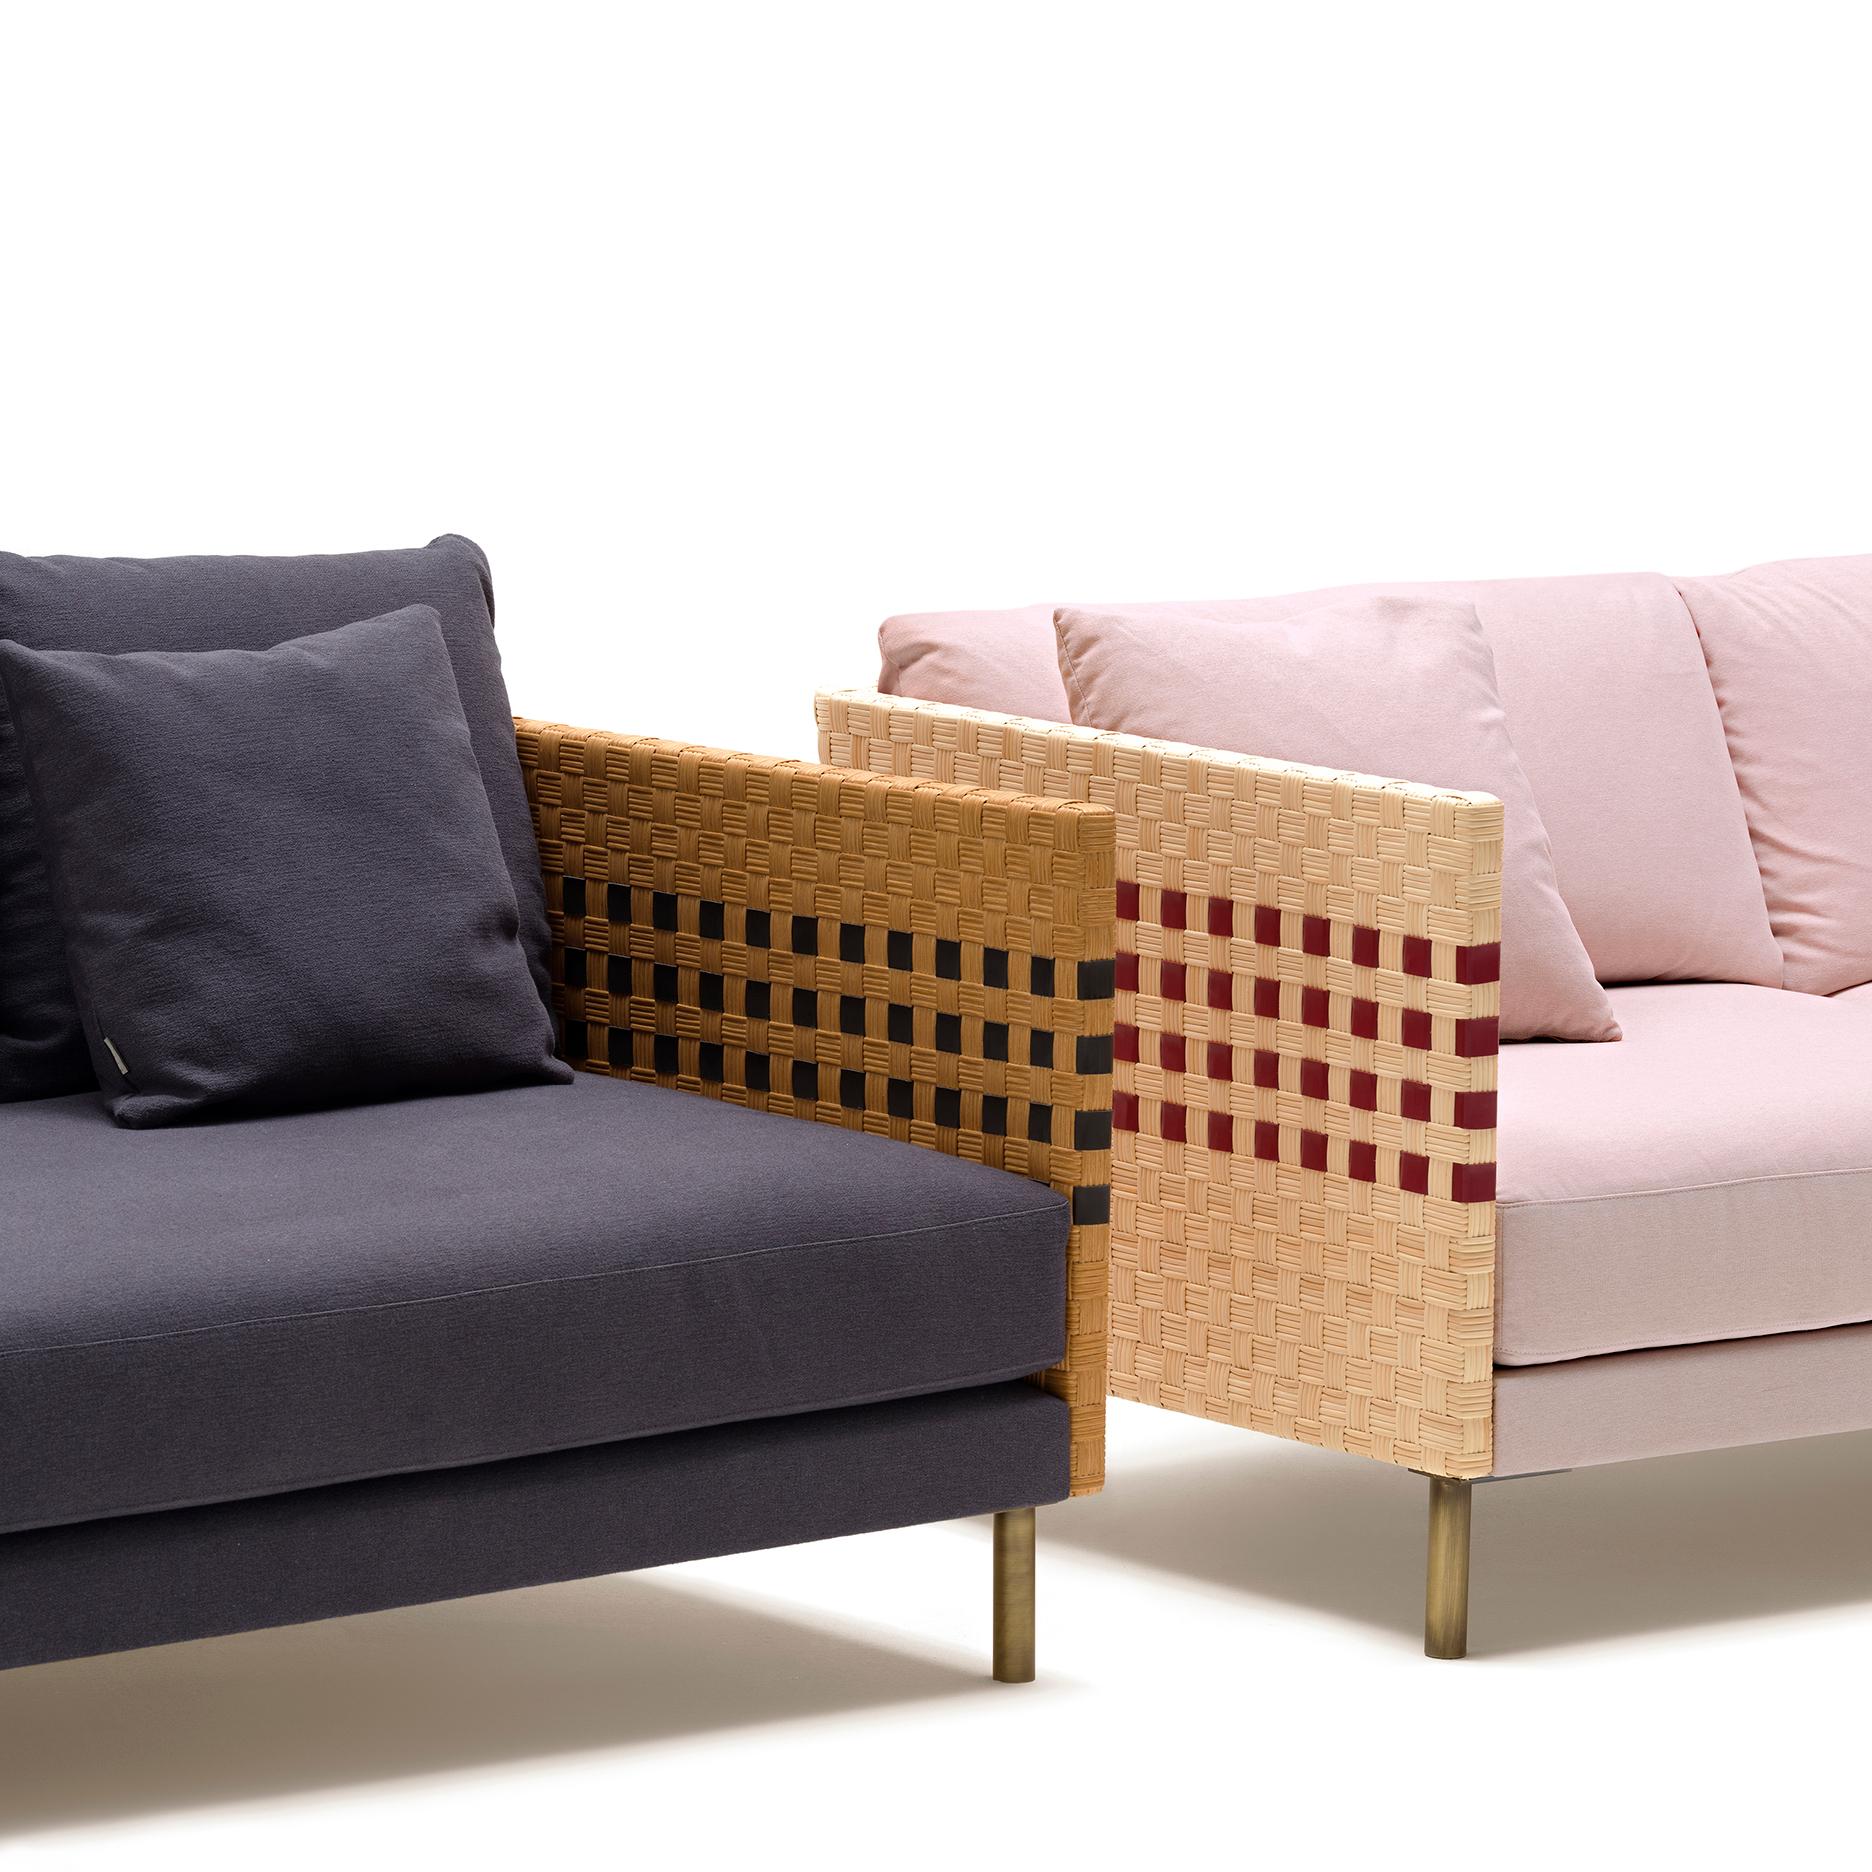 Milli 240 two extra seats sofa - Module 115
The compositional feature is the armrest, which references the iconic woven motif invented in this region and reinterpreted, in this case, in the alternation between wicker and leather “tiles,” suggesting